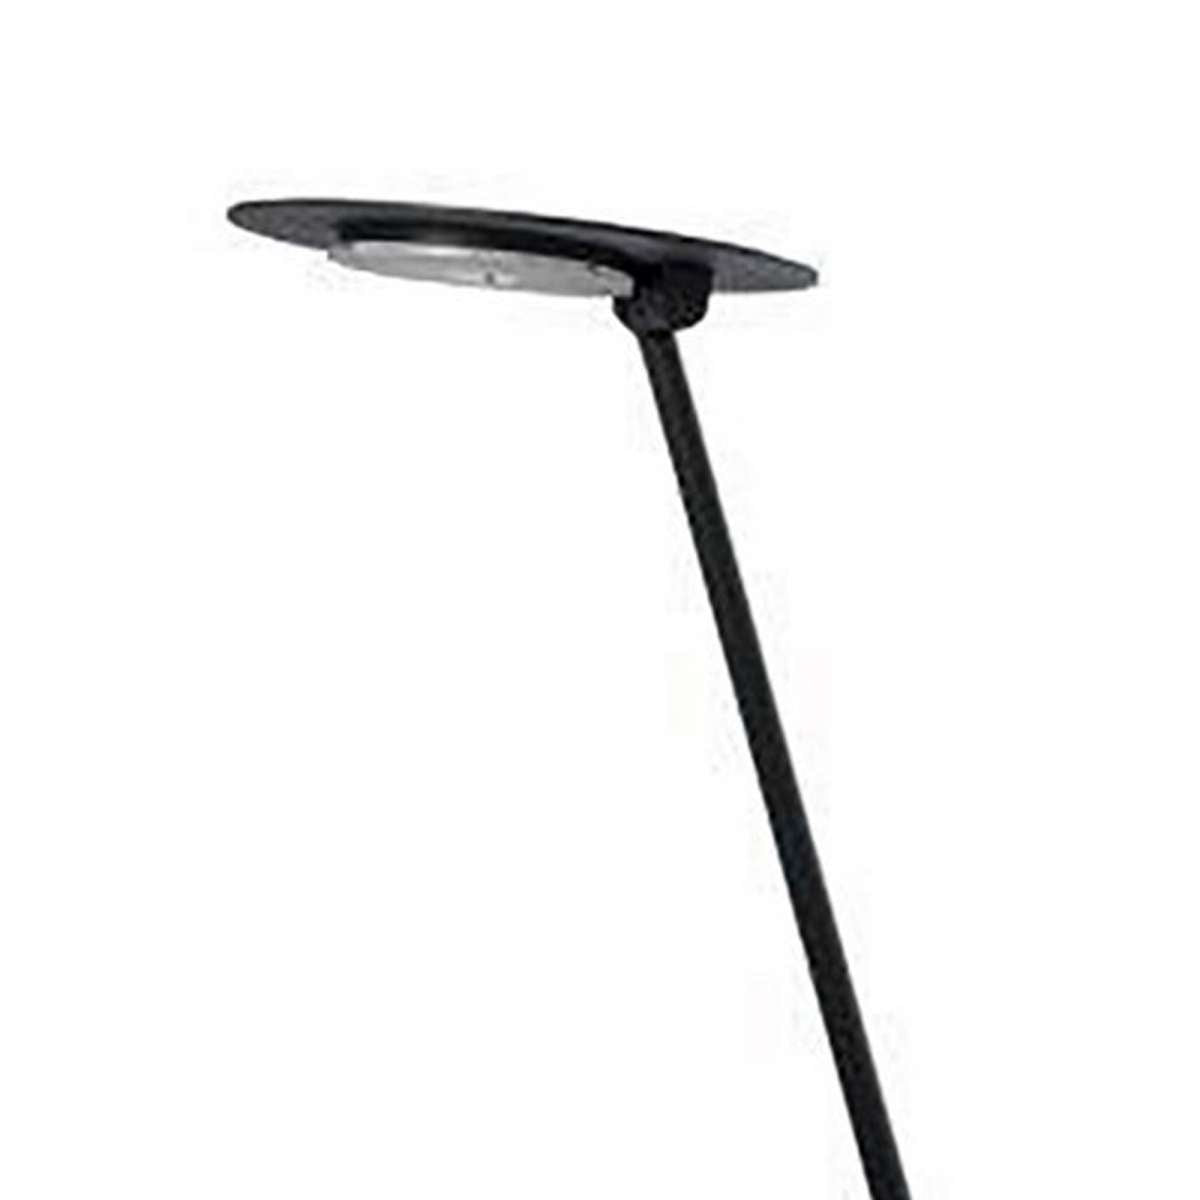 Desk Lamp With Pendulum Style And Flat Saucer Shade, Black By Benzara